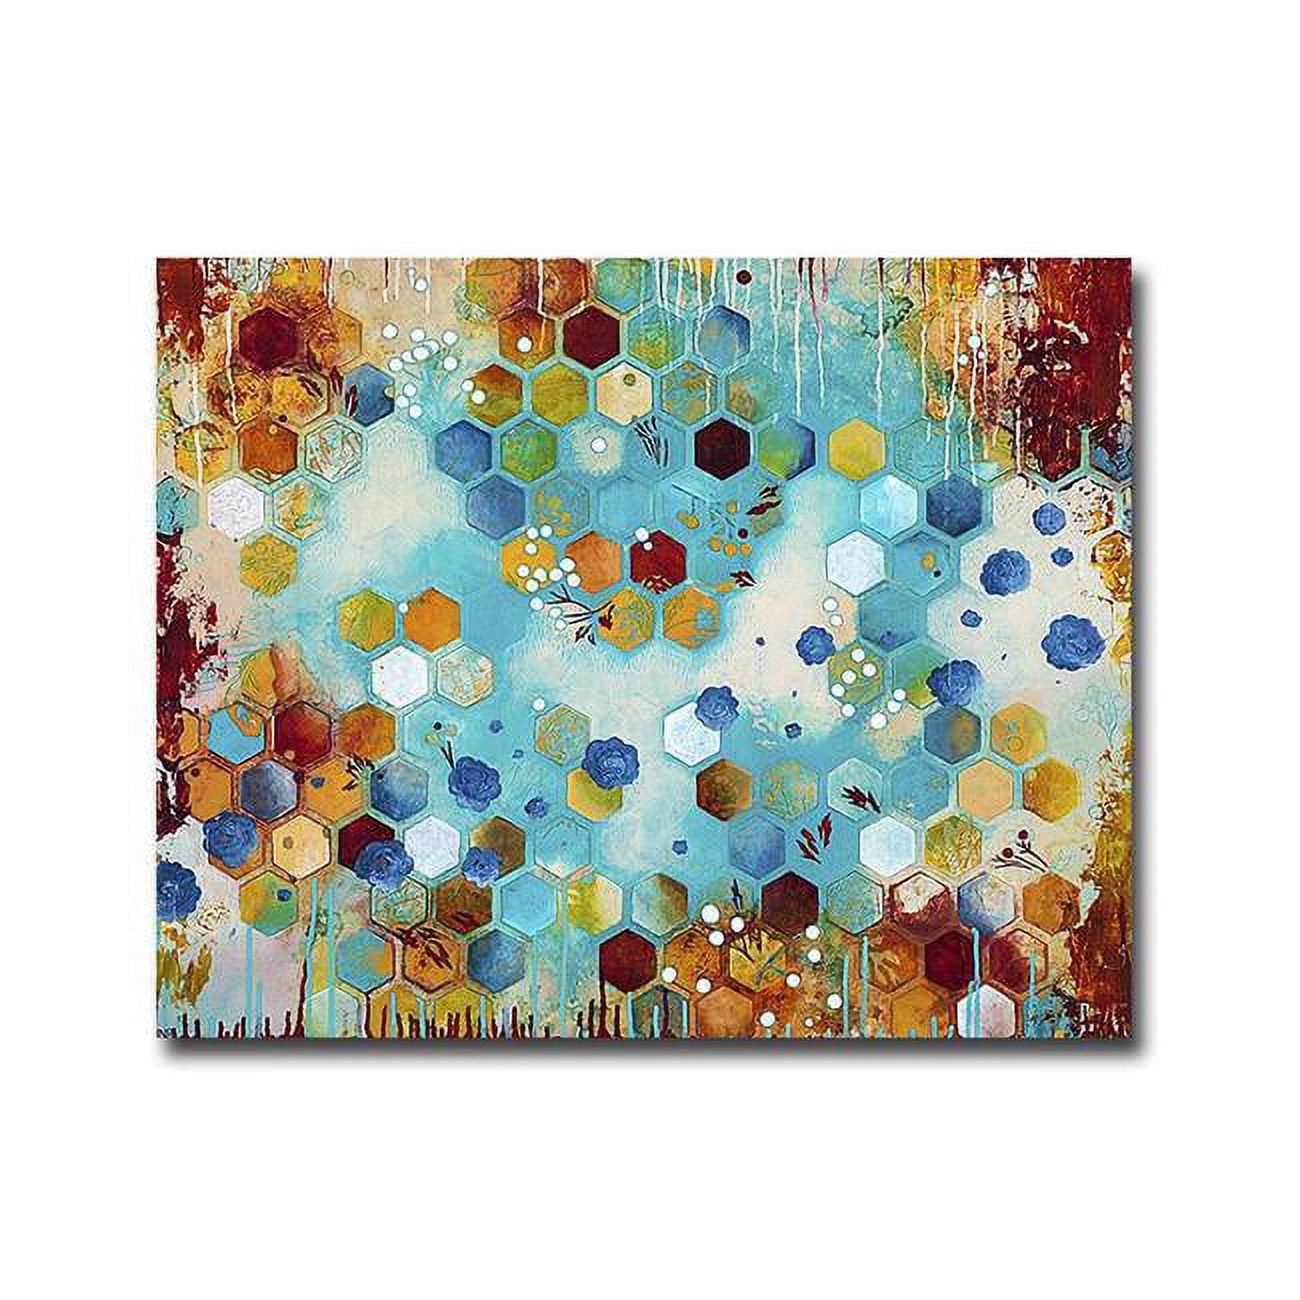 1620n954ig Scattered By Heather Noel Robinson Premium Gallery-wrapped Canvas Giclee Art - Ready-to-hang, 16 X 20 X 1.5 In.